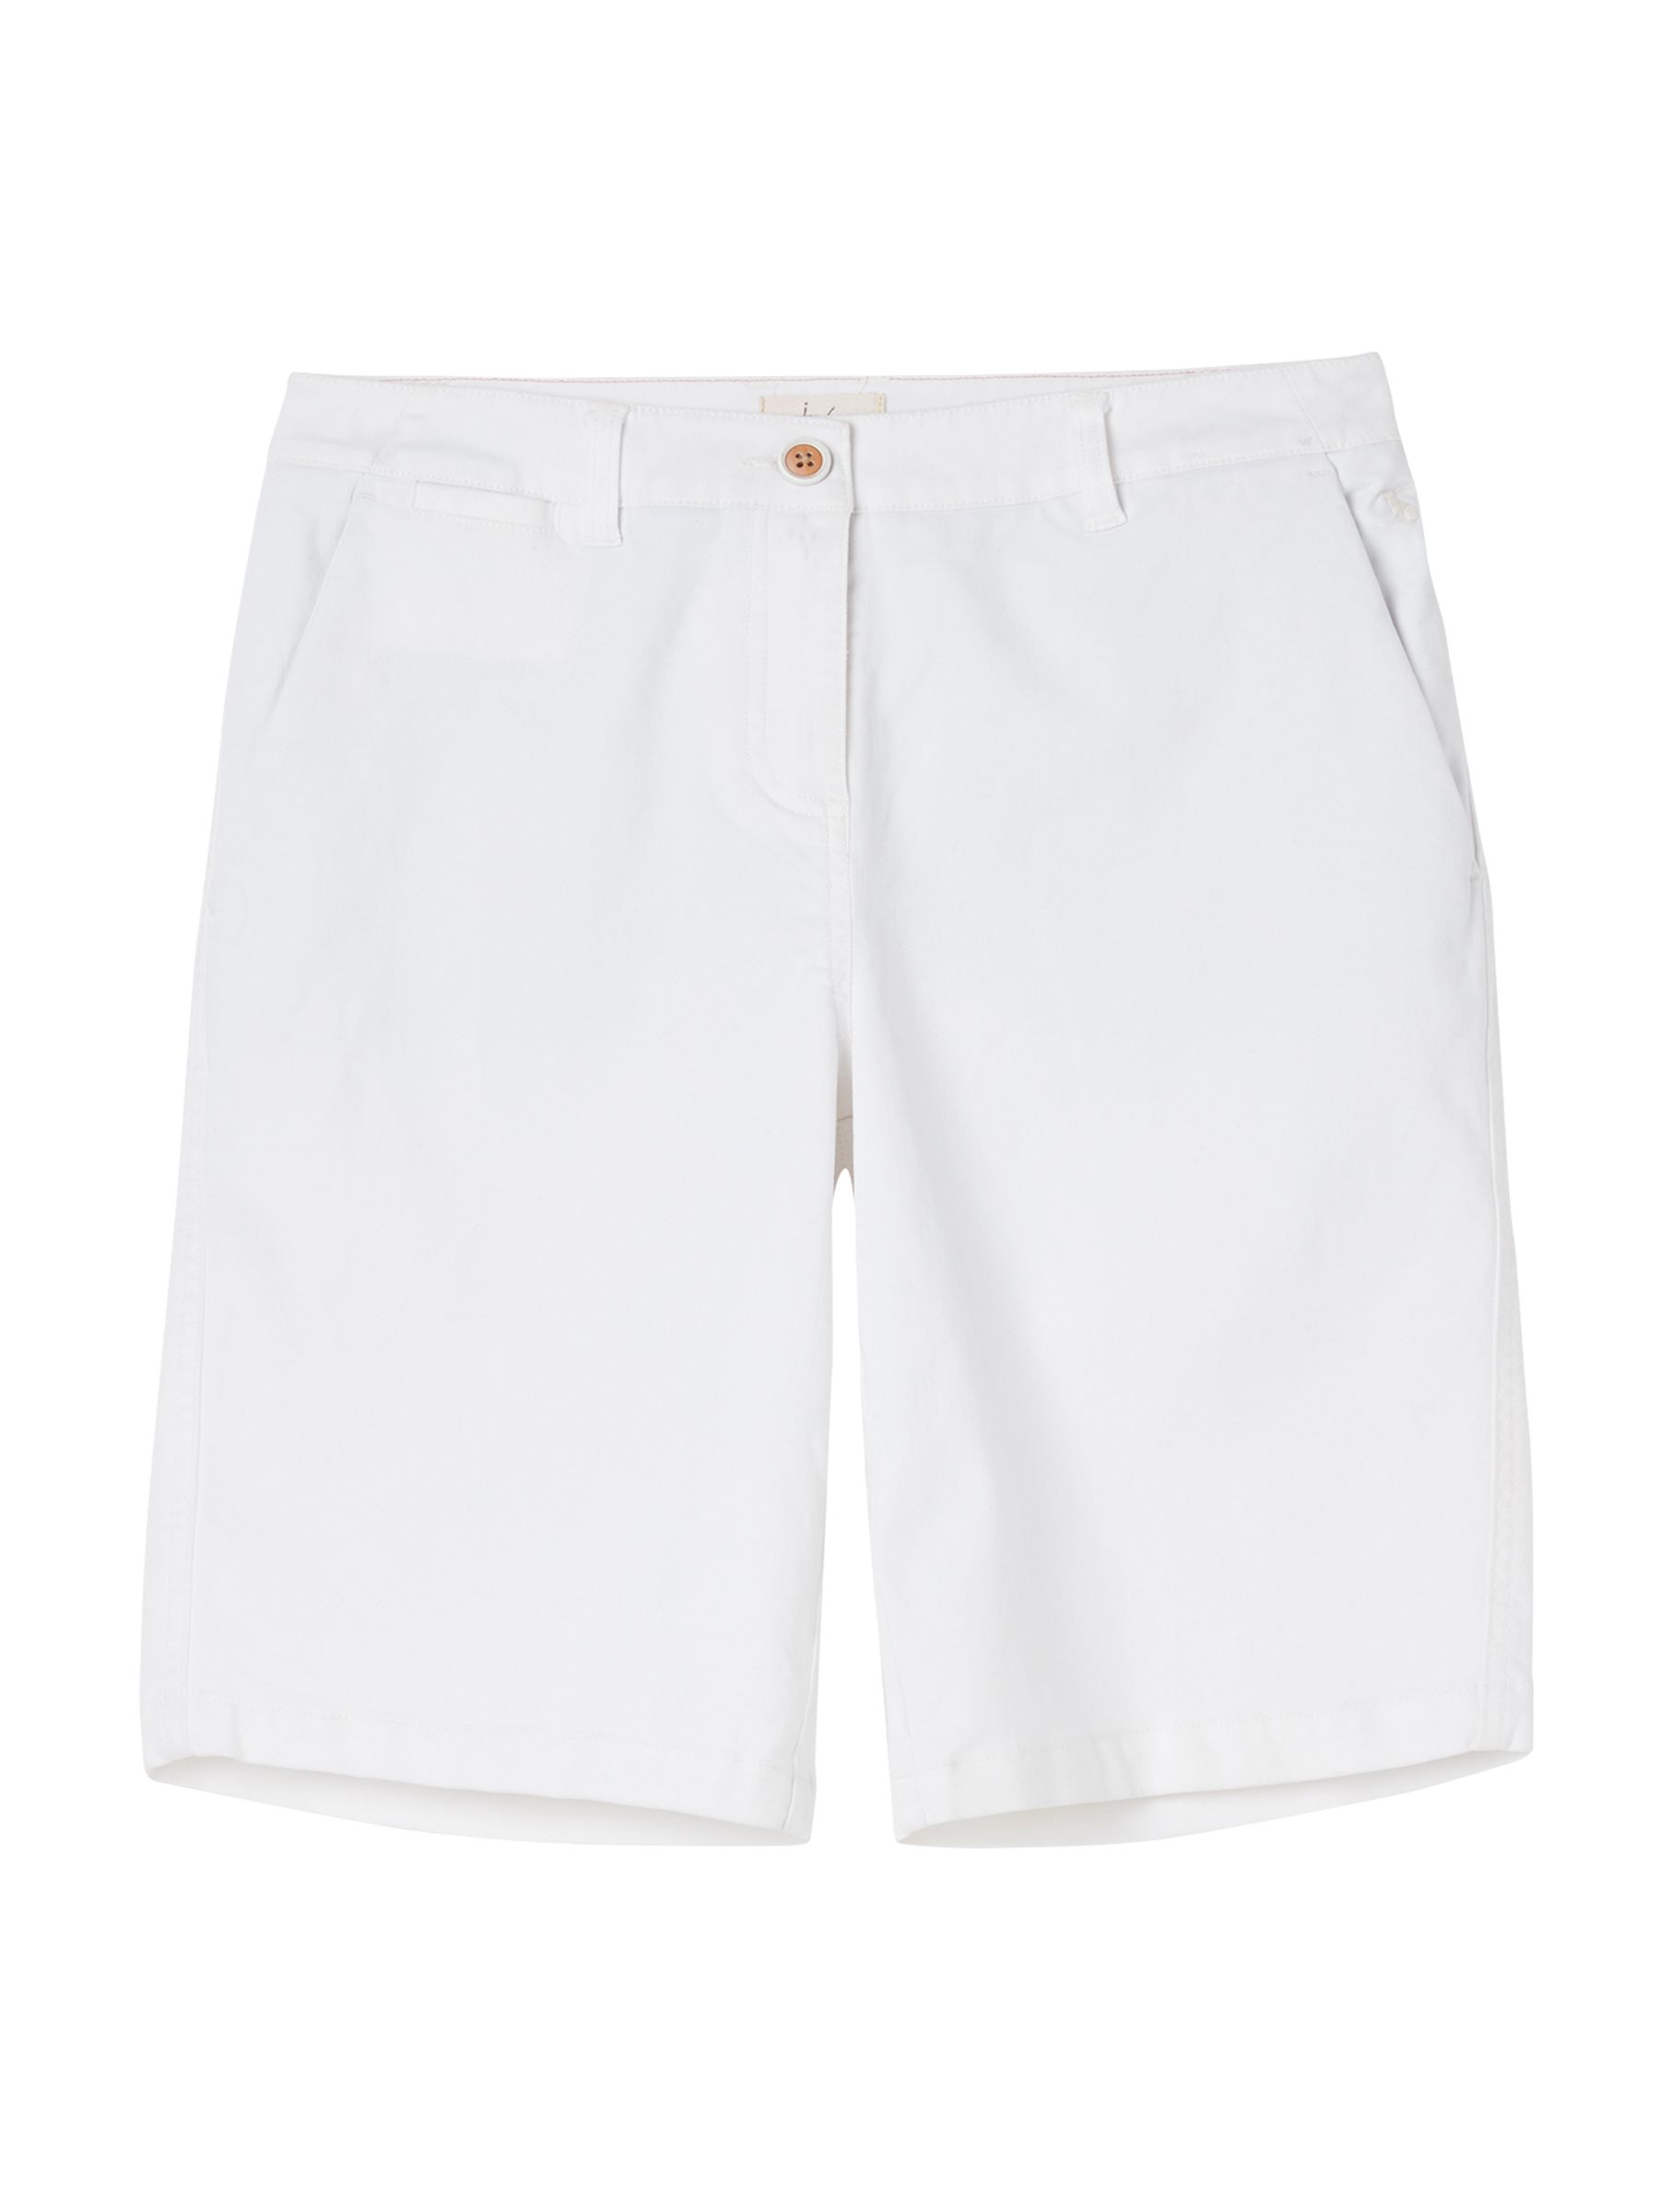 Buy Joules Cruise Long Chino Shorts from the Joules online shop